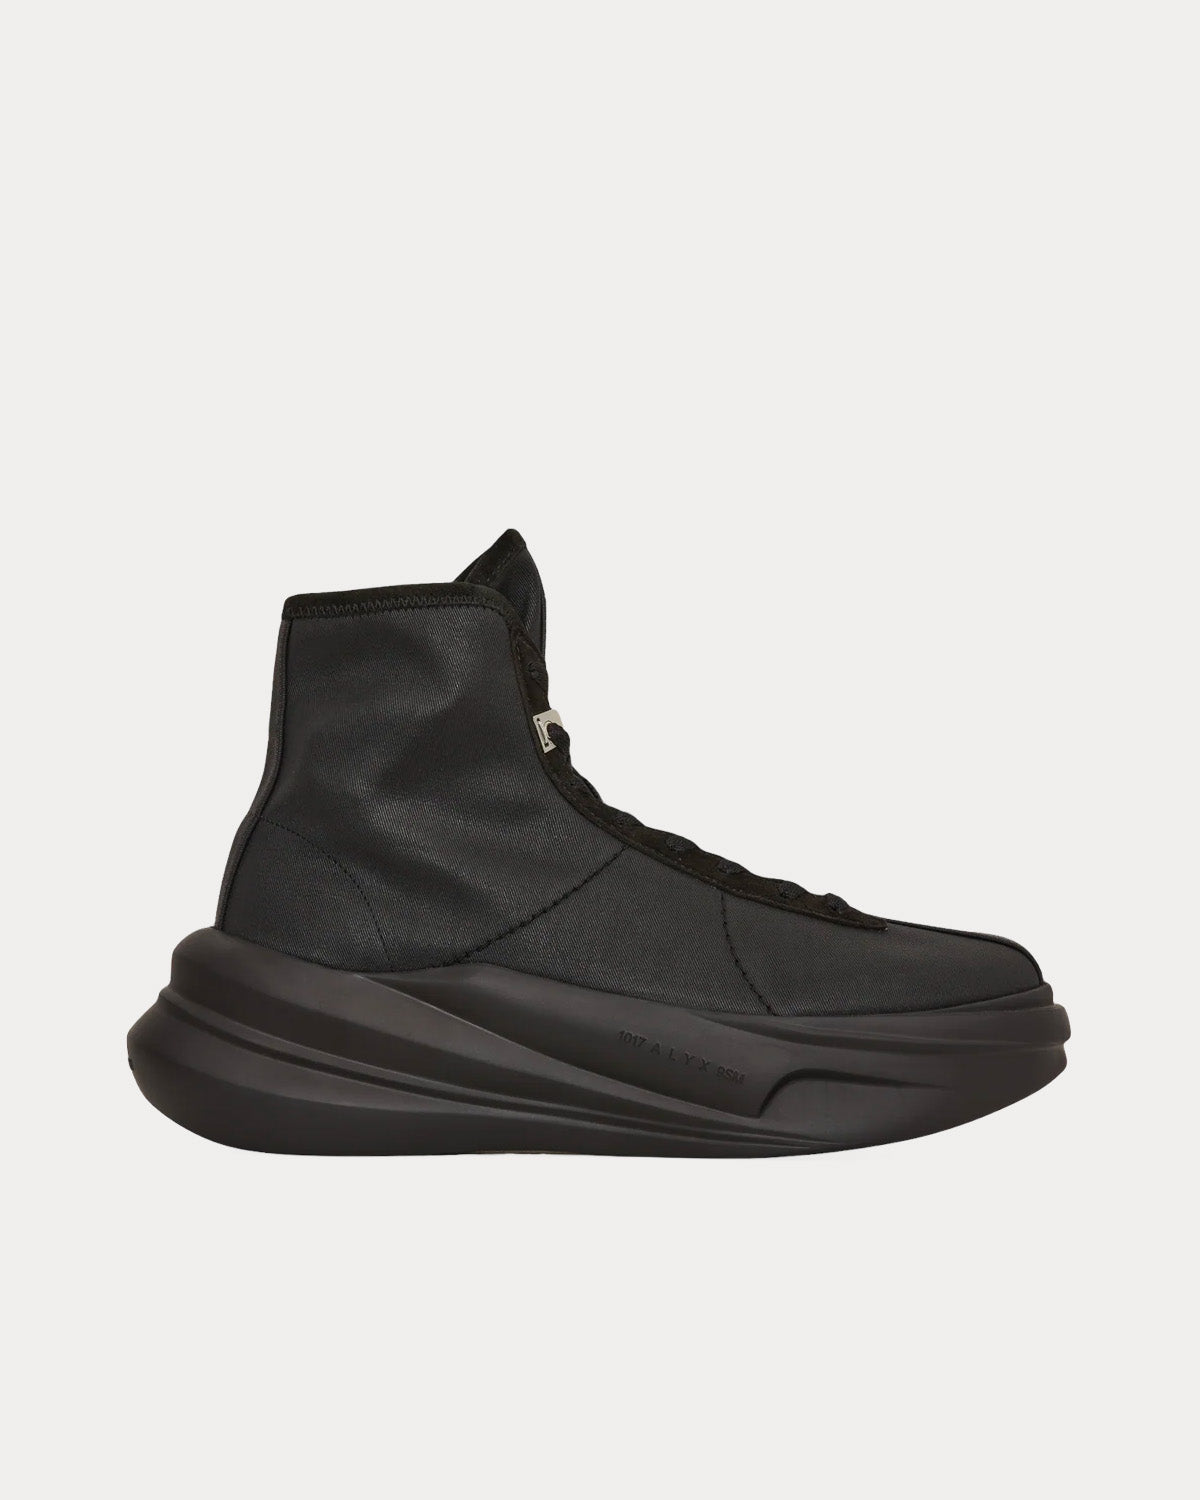 1017 ALYX 9SM - Aria Treated Canvas Black High Top Sneakers